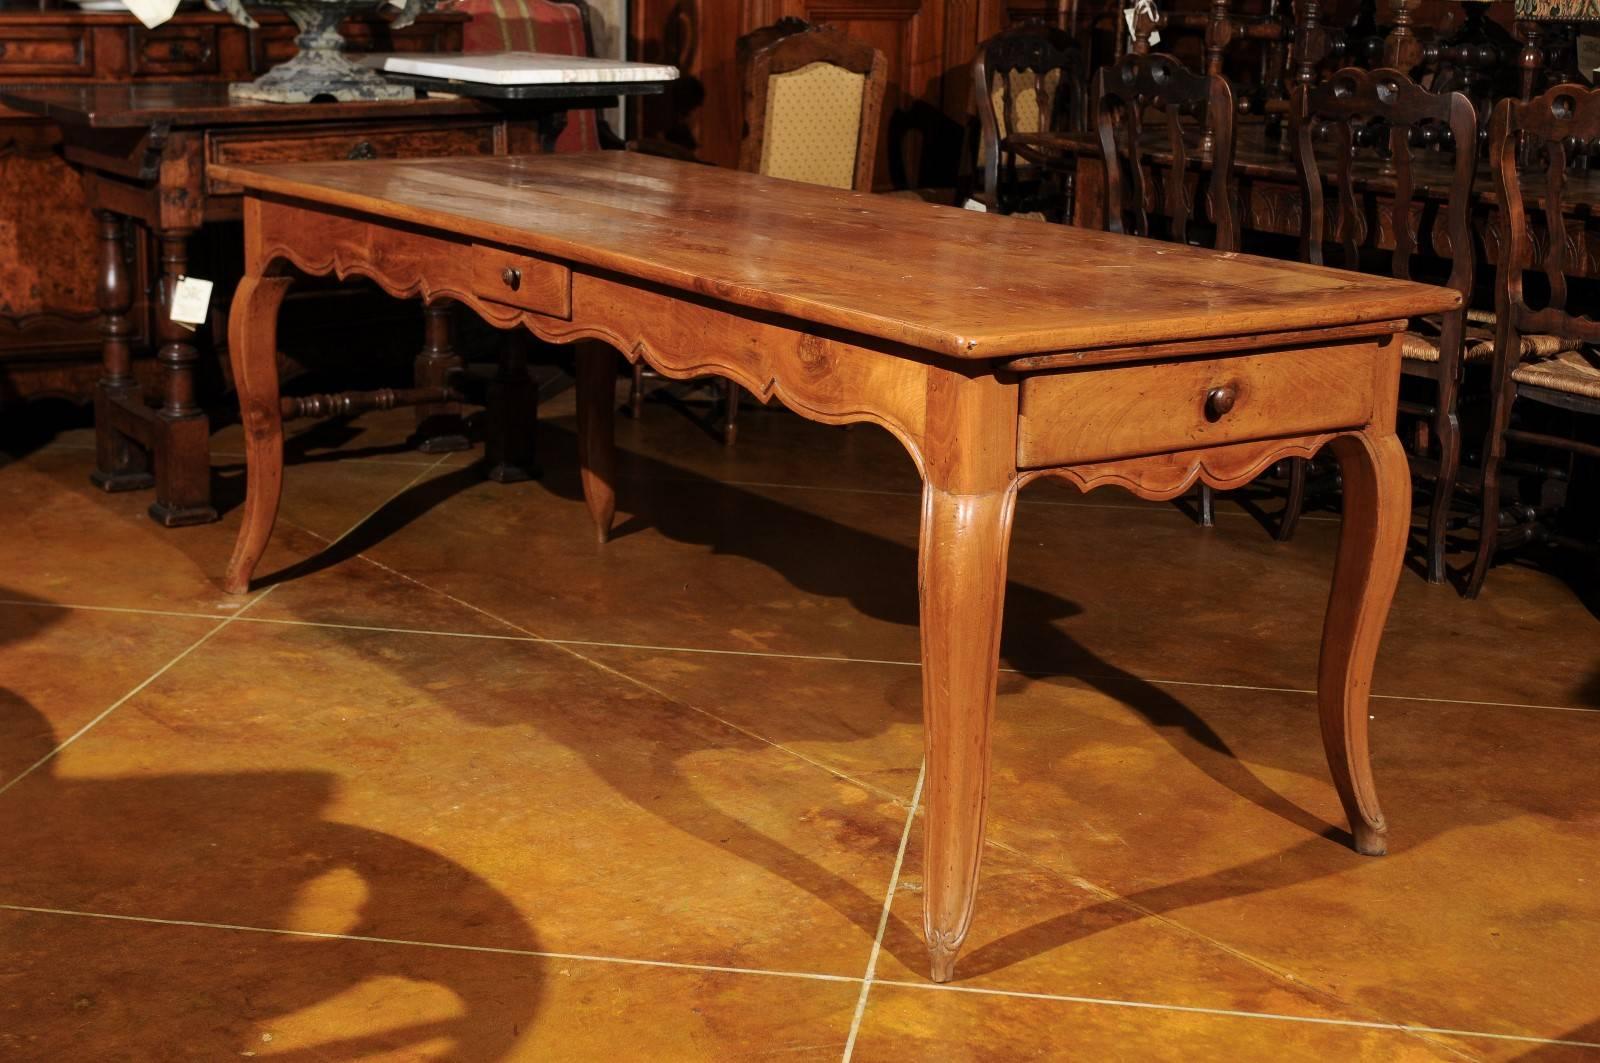 A turn of the 19th century French Fruitwood farm table with 2 drawers, shaped apron and cabriole legs.